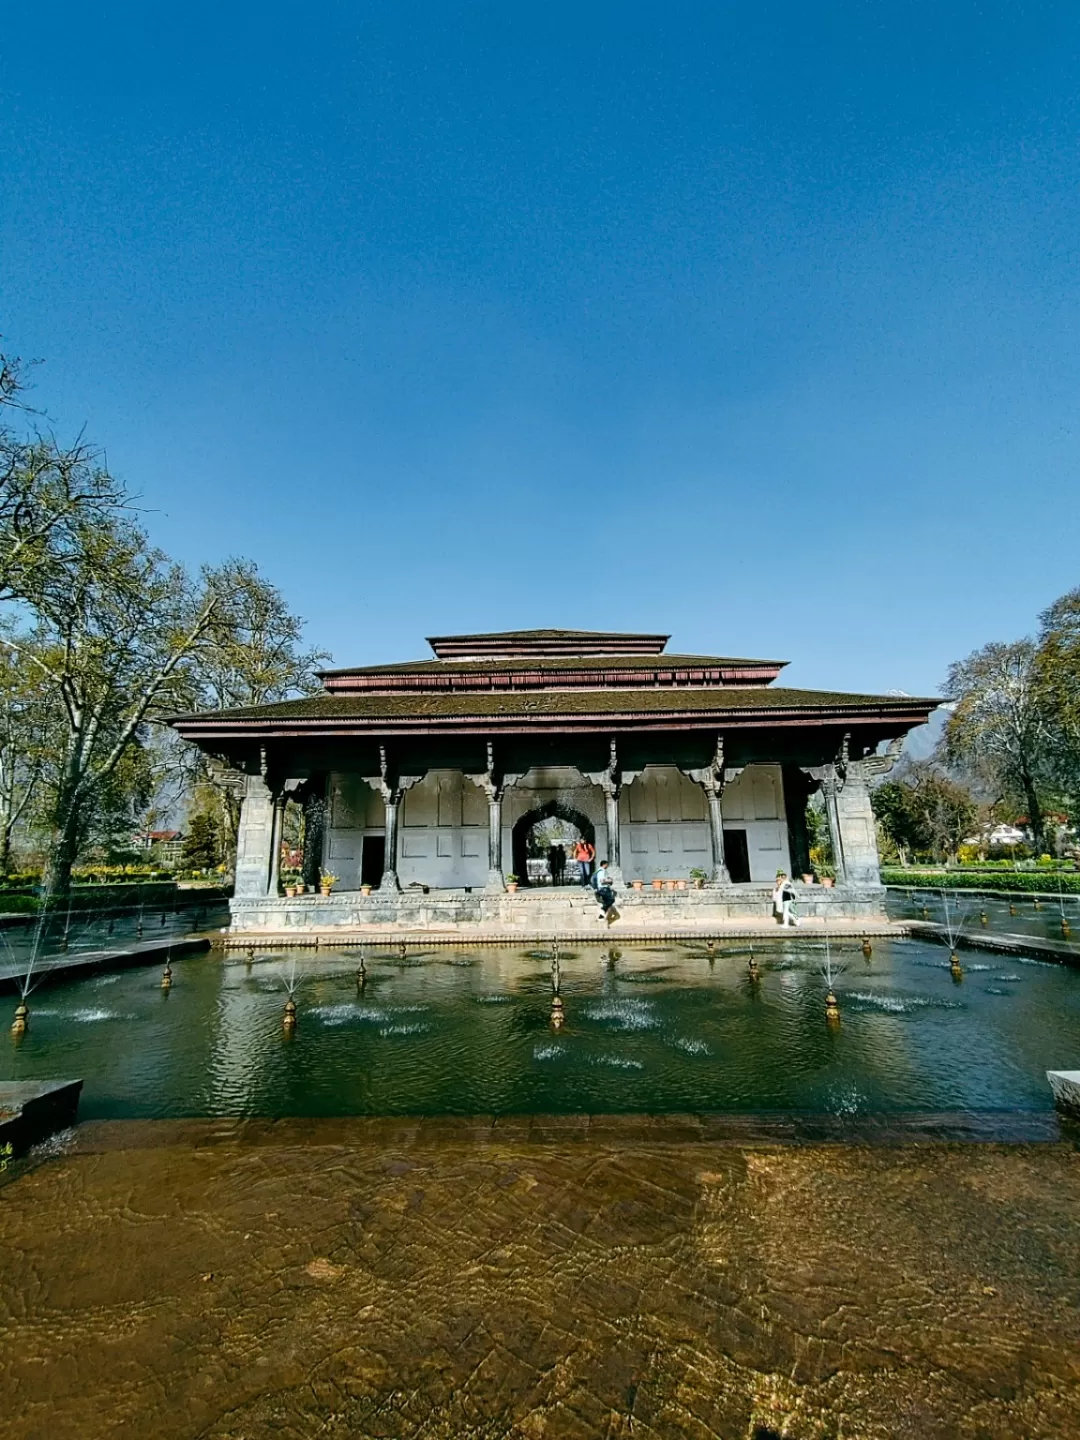 Photo of Shalimar Bagh Mughal Garden By Jan Akhter